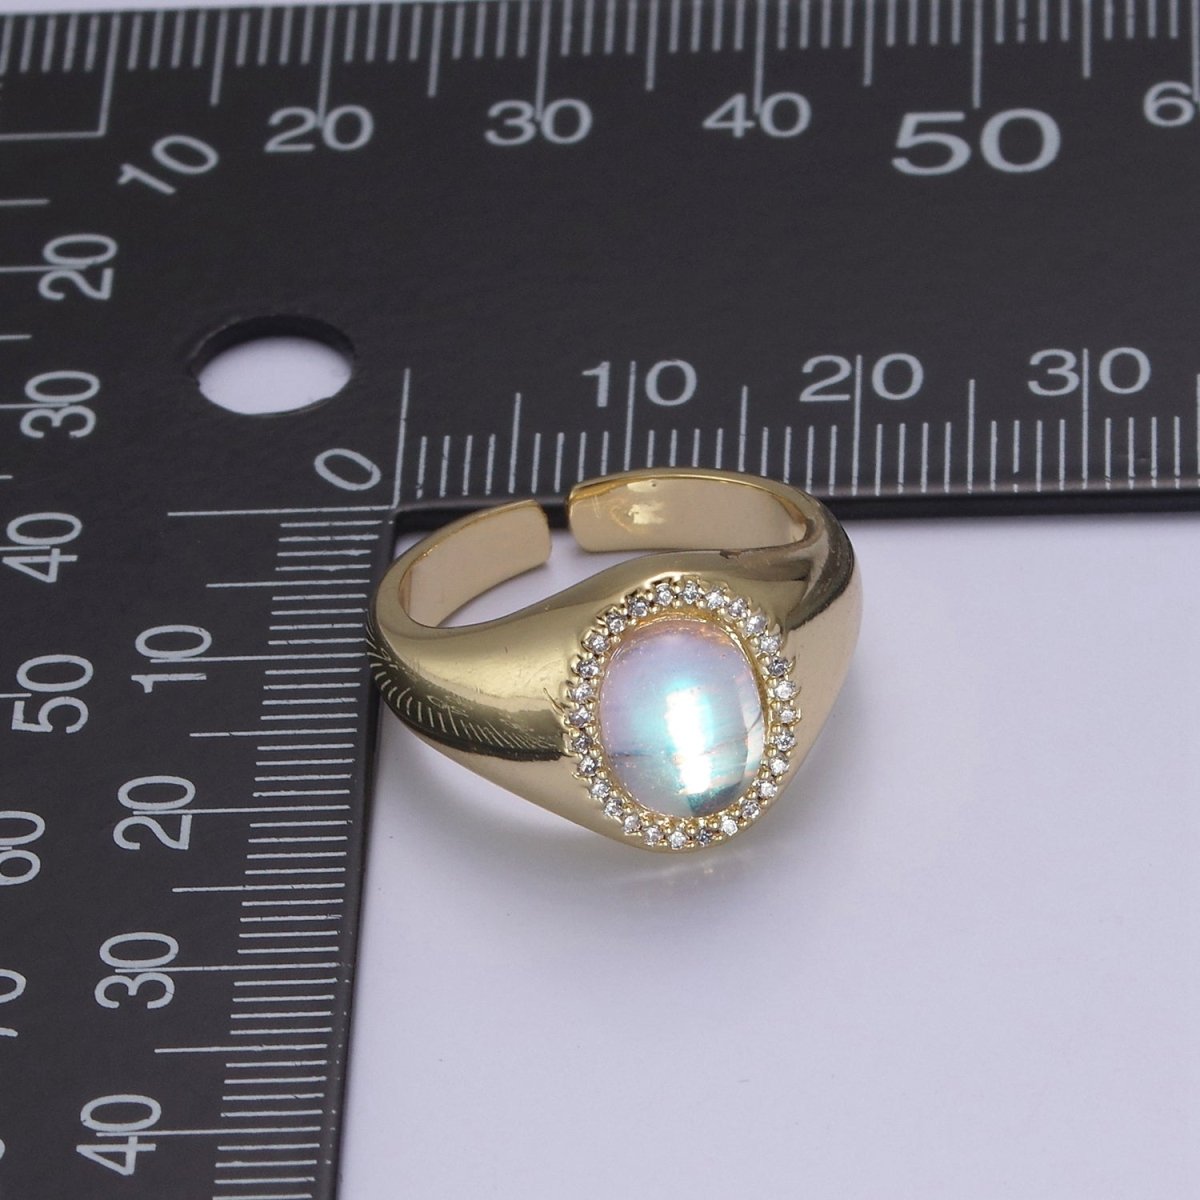 Dome Ring Cat's Eye Stone 14k Gold Filled Adjustable Minimalist Statement Ring Gift S-368 - DLUXCA